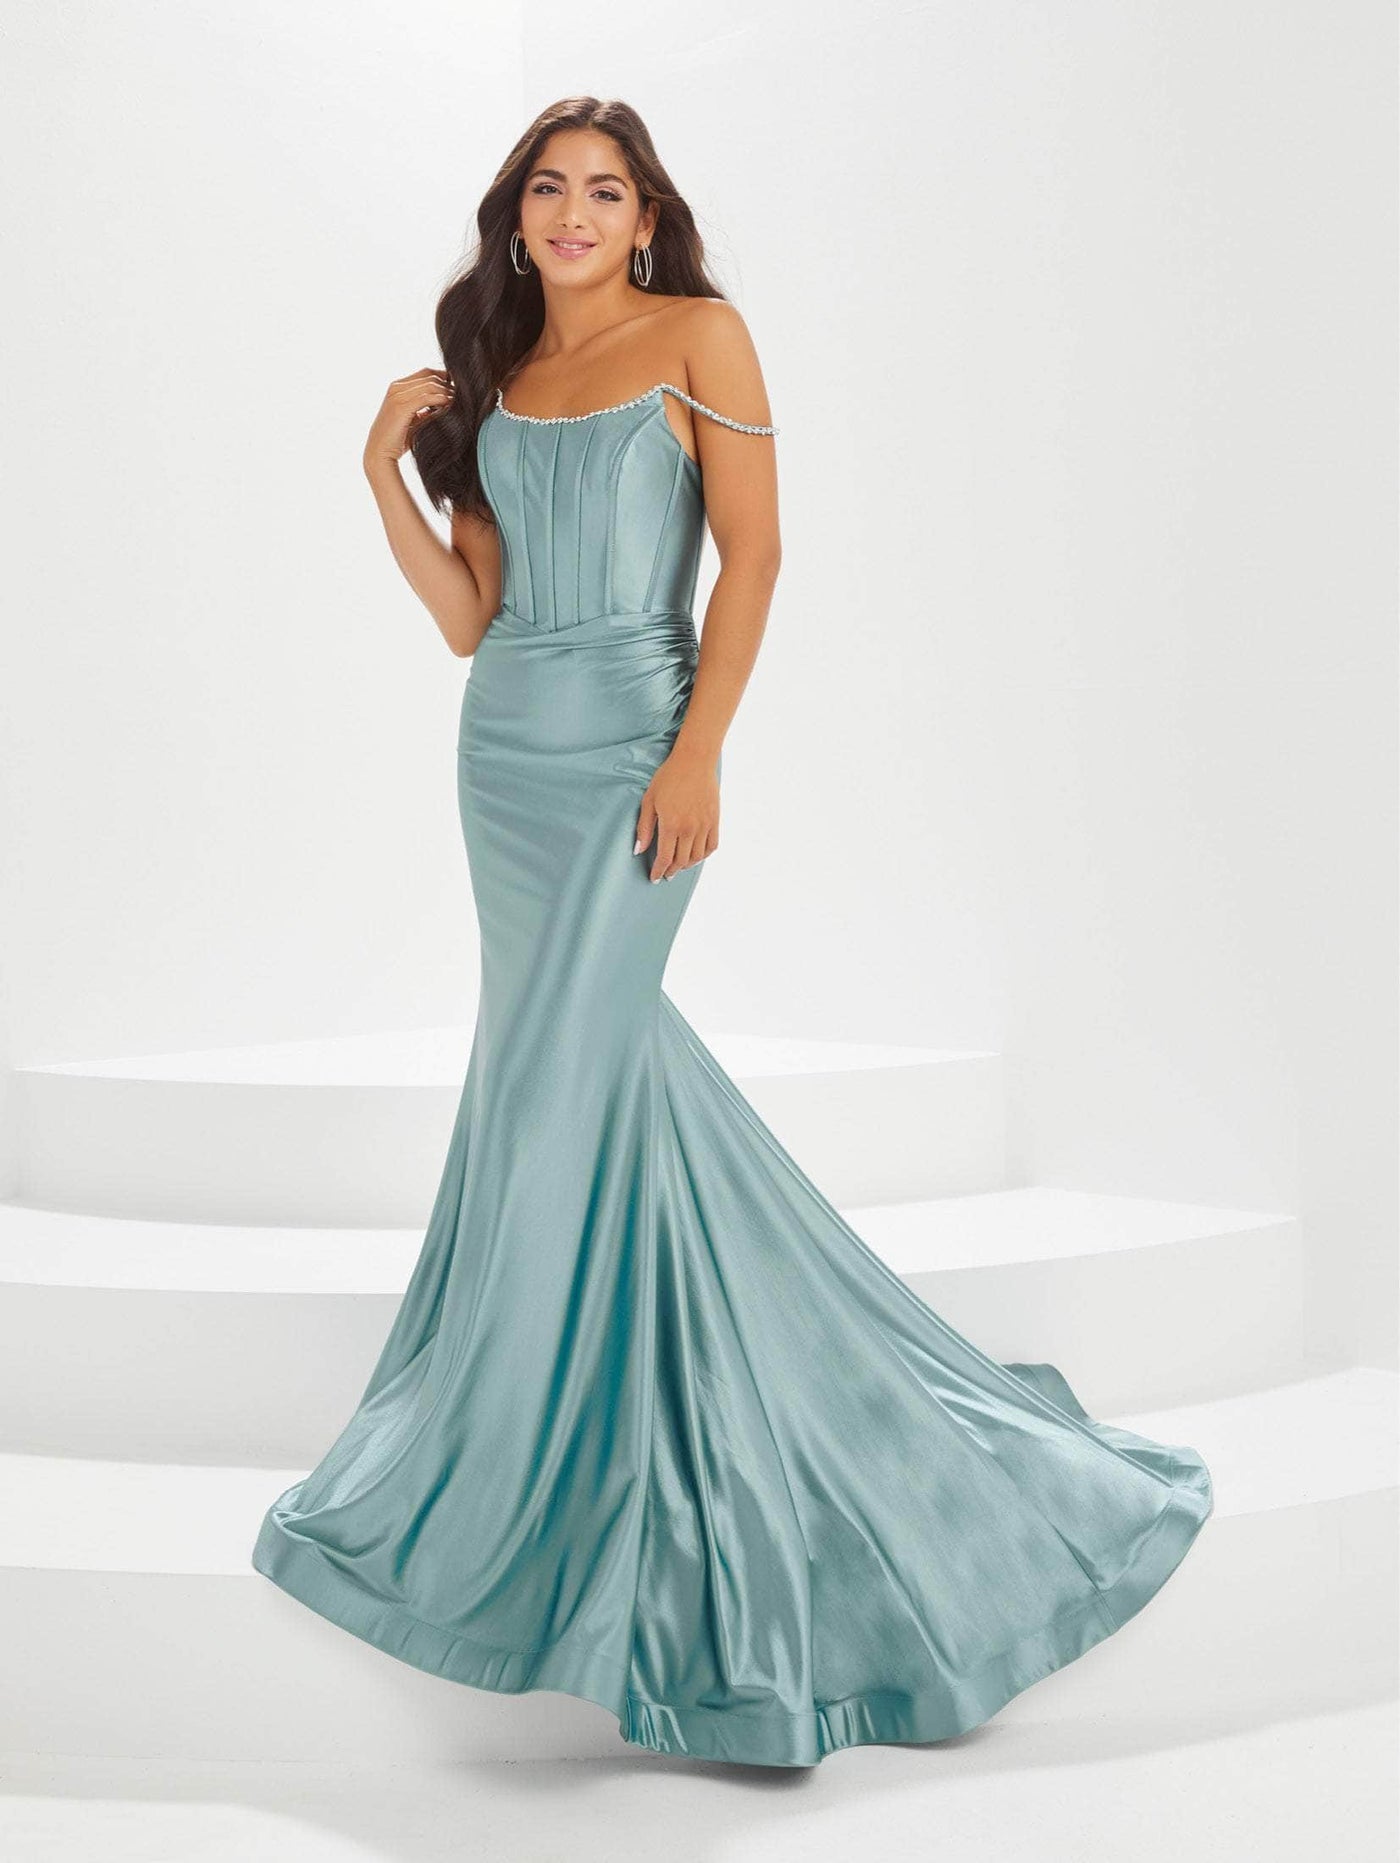 Tiffany Designs by Christina Wu 16003 - Sleeveless Prom Gown Special Occasion Dress